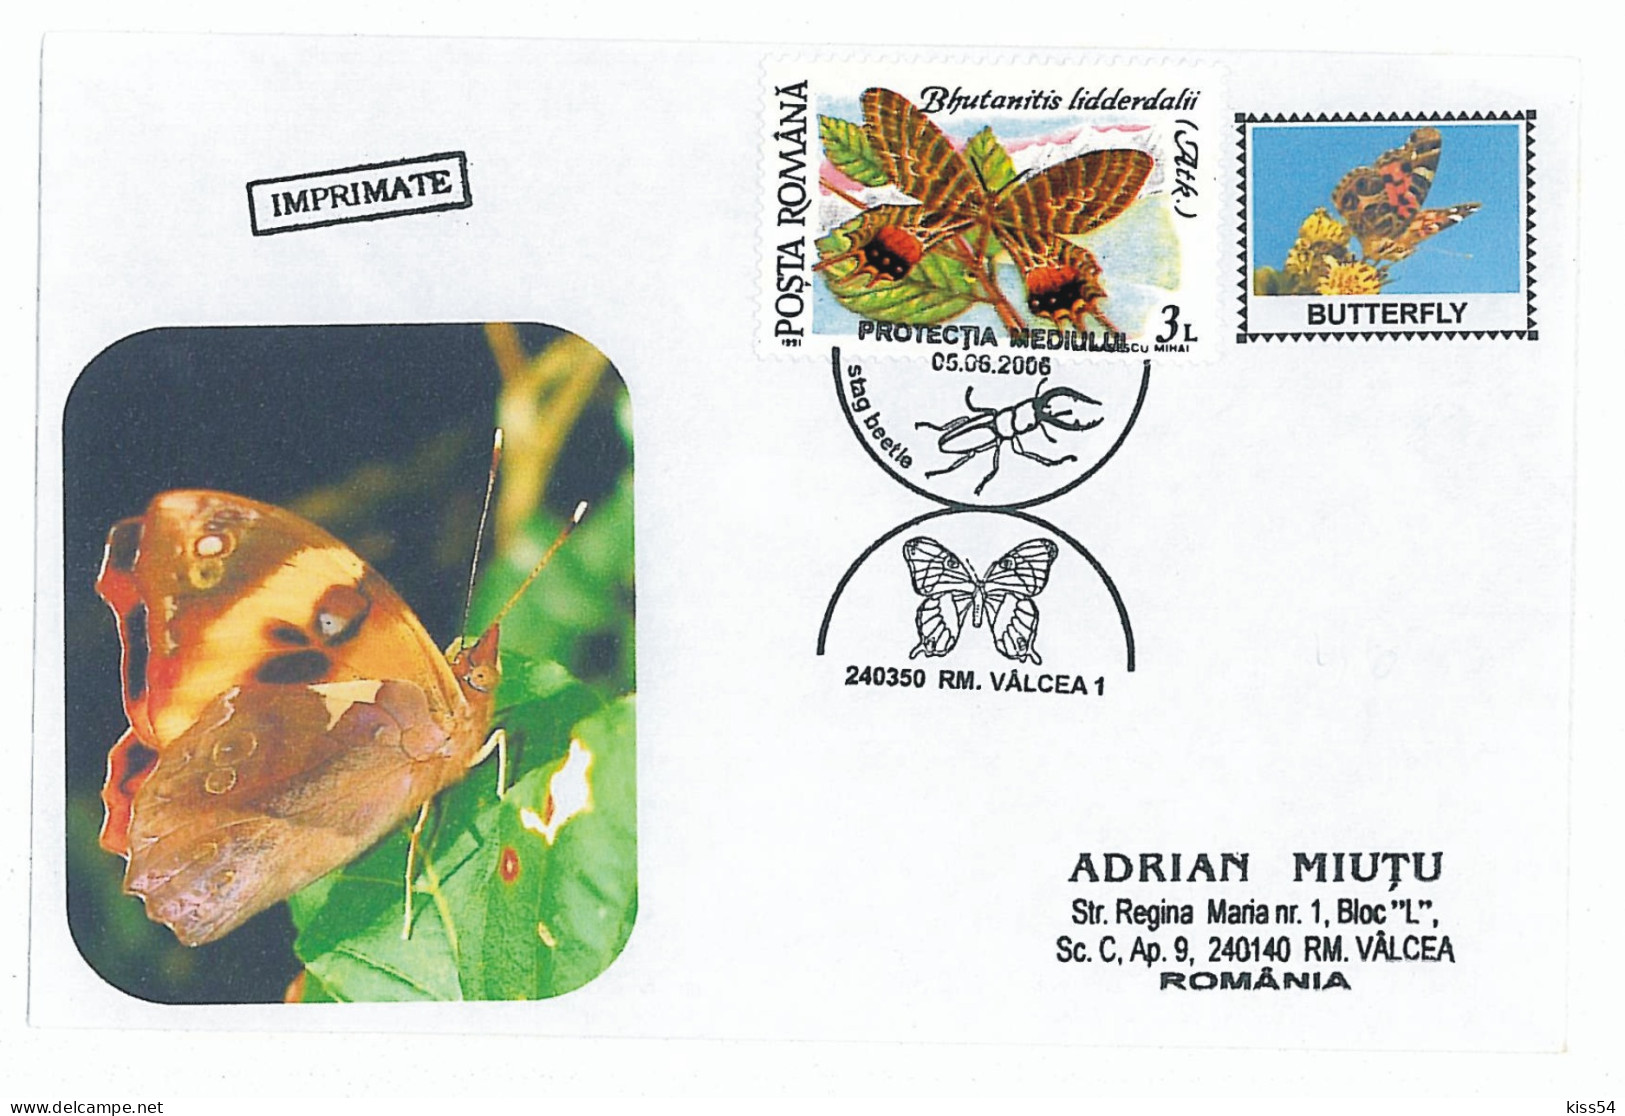 COV 28 - 561 BUTTERFLY, Environmental Protection, Romania - Cover - Used - 2006 - Vlinders